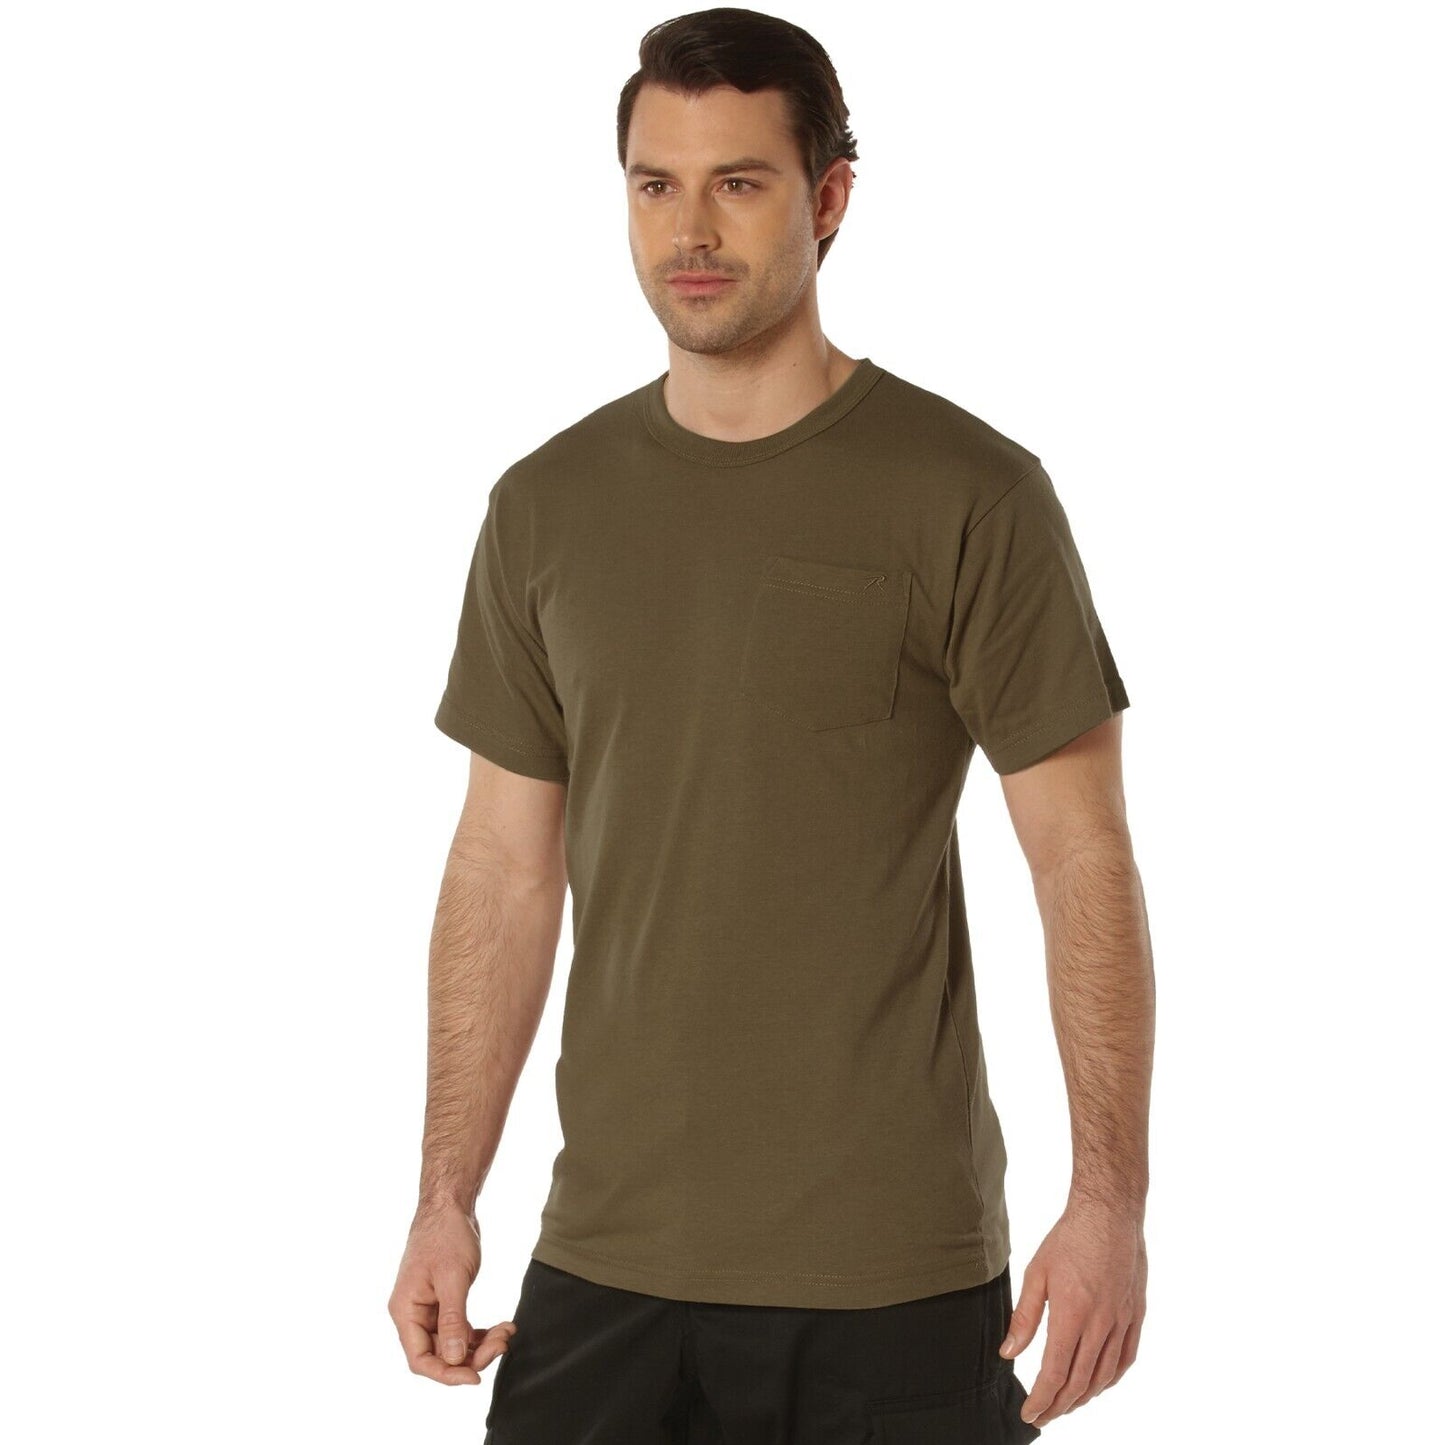 Rothco Men's Pocket T-Shirt Casual Tee Cotton Polyester